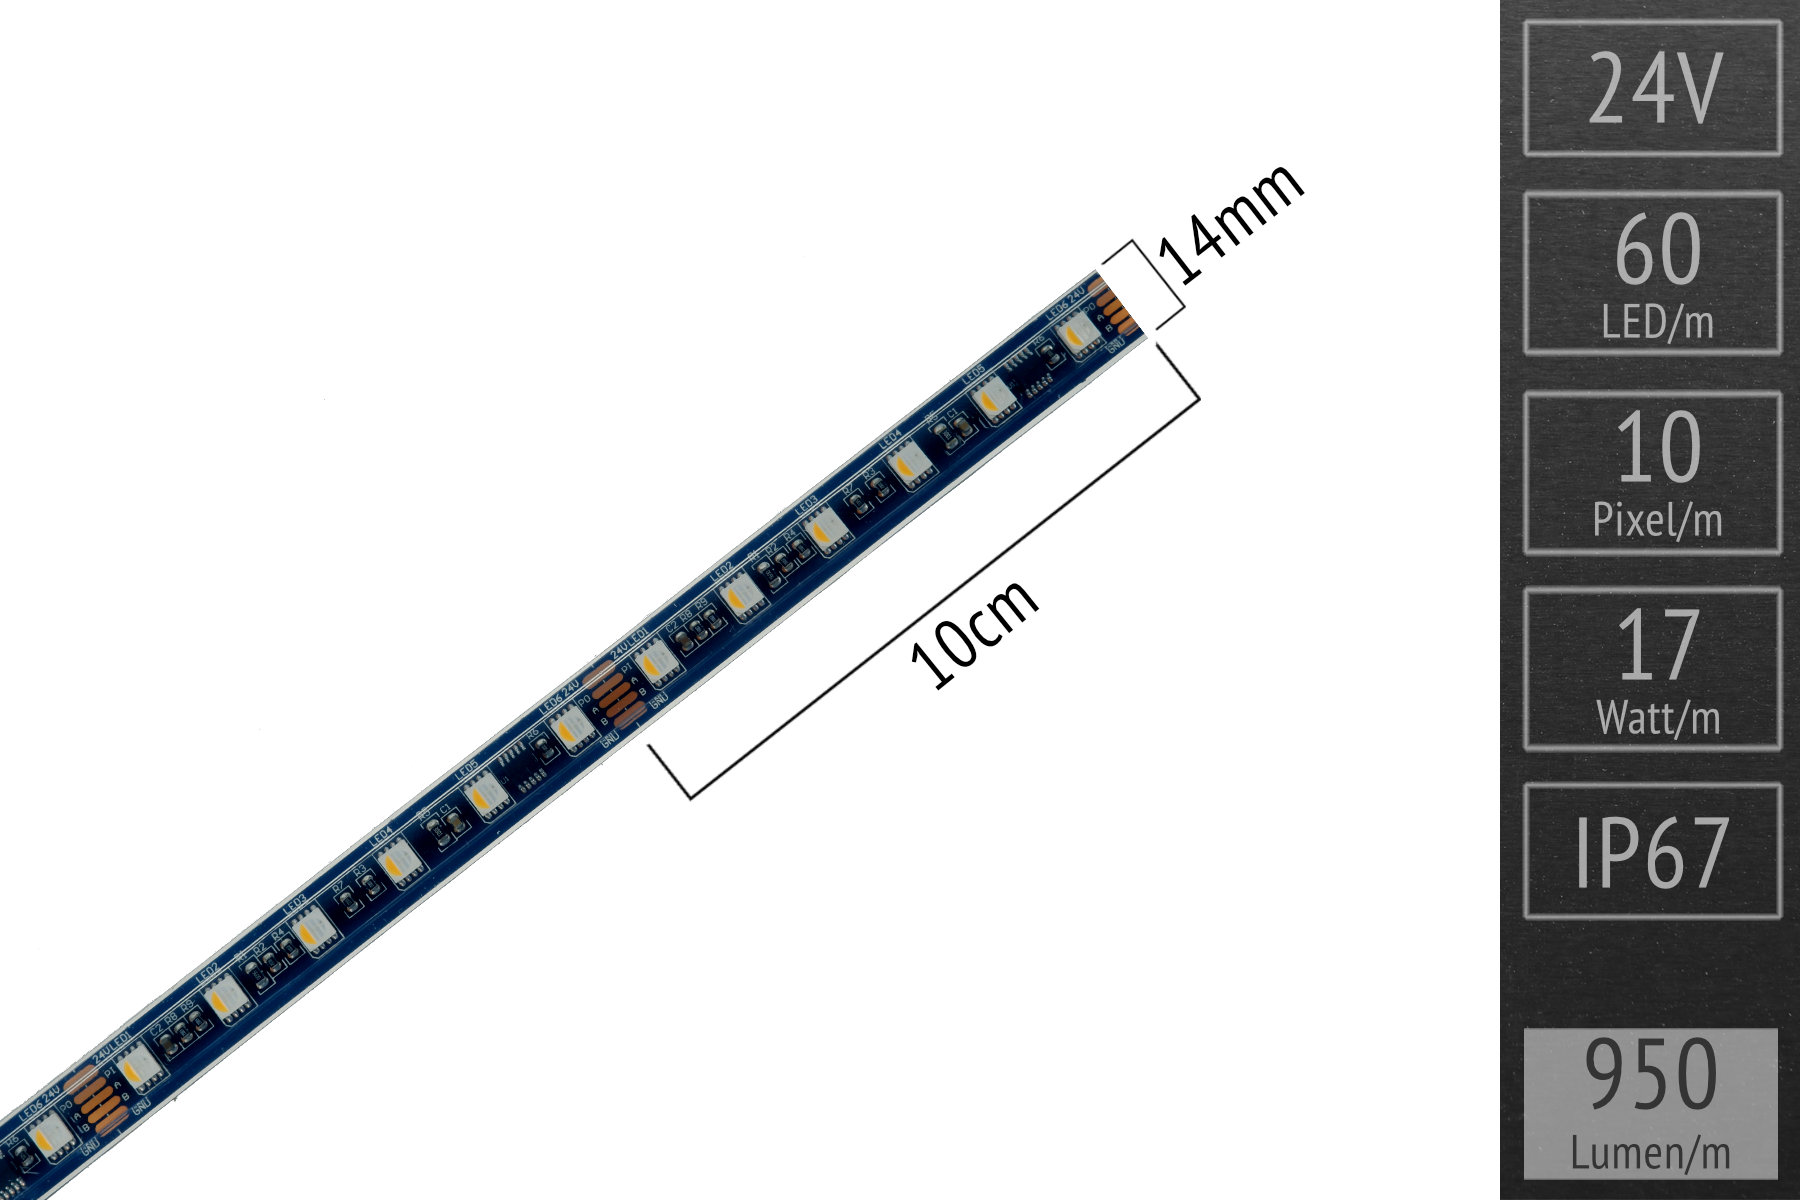 RGBW Pixel LED strips directly controllable via DMX | 24V 